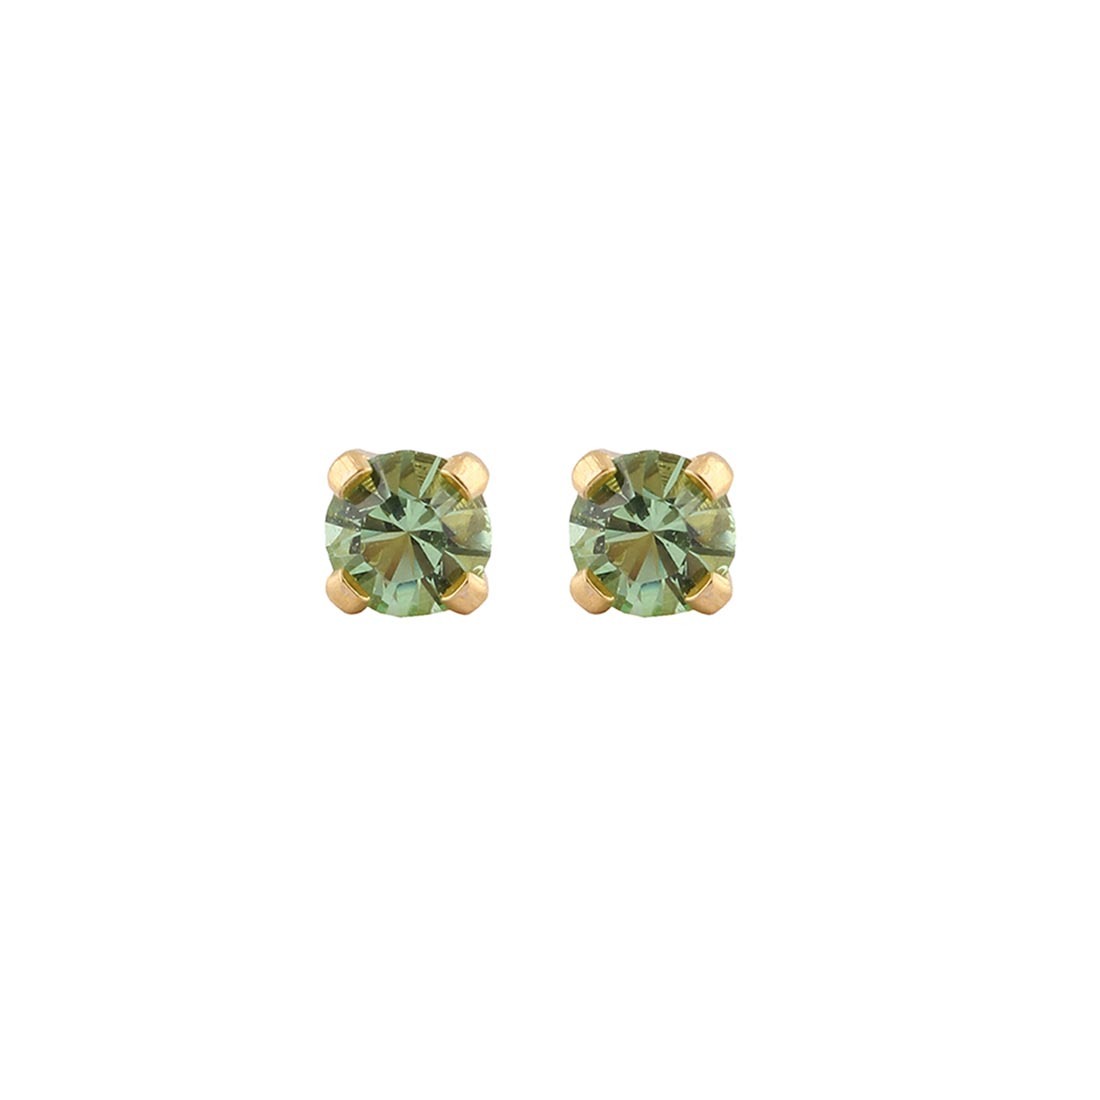 3MM - February Amethyst Birthstone (Round) - Green | 24K Gold Plated Kids / Baby / Children’s Fashion Earrings | Studex Tiny Tips